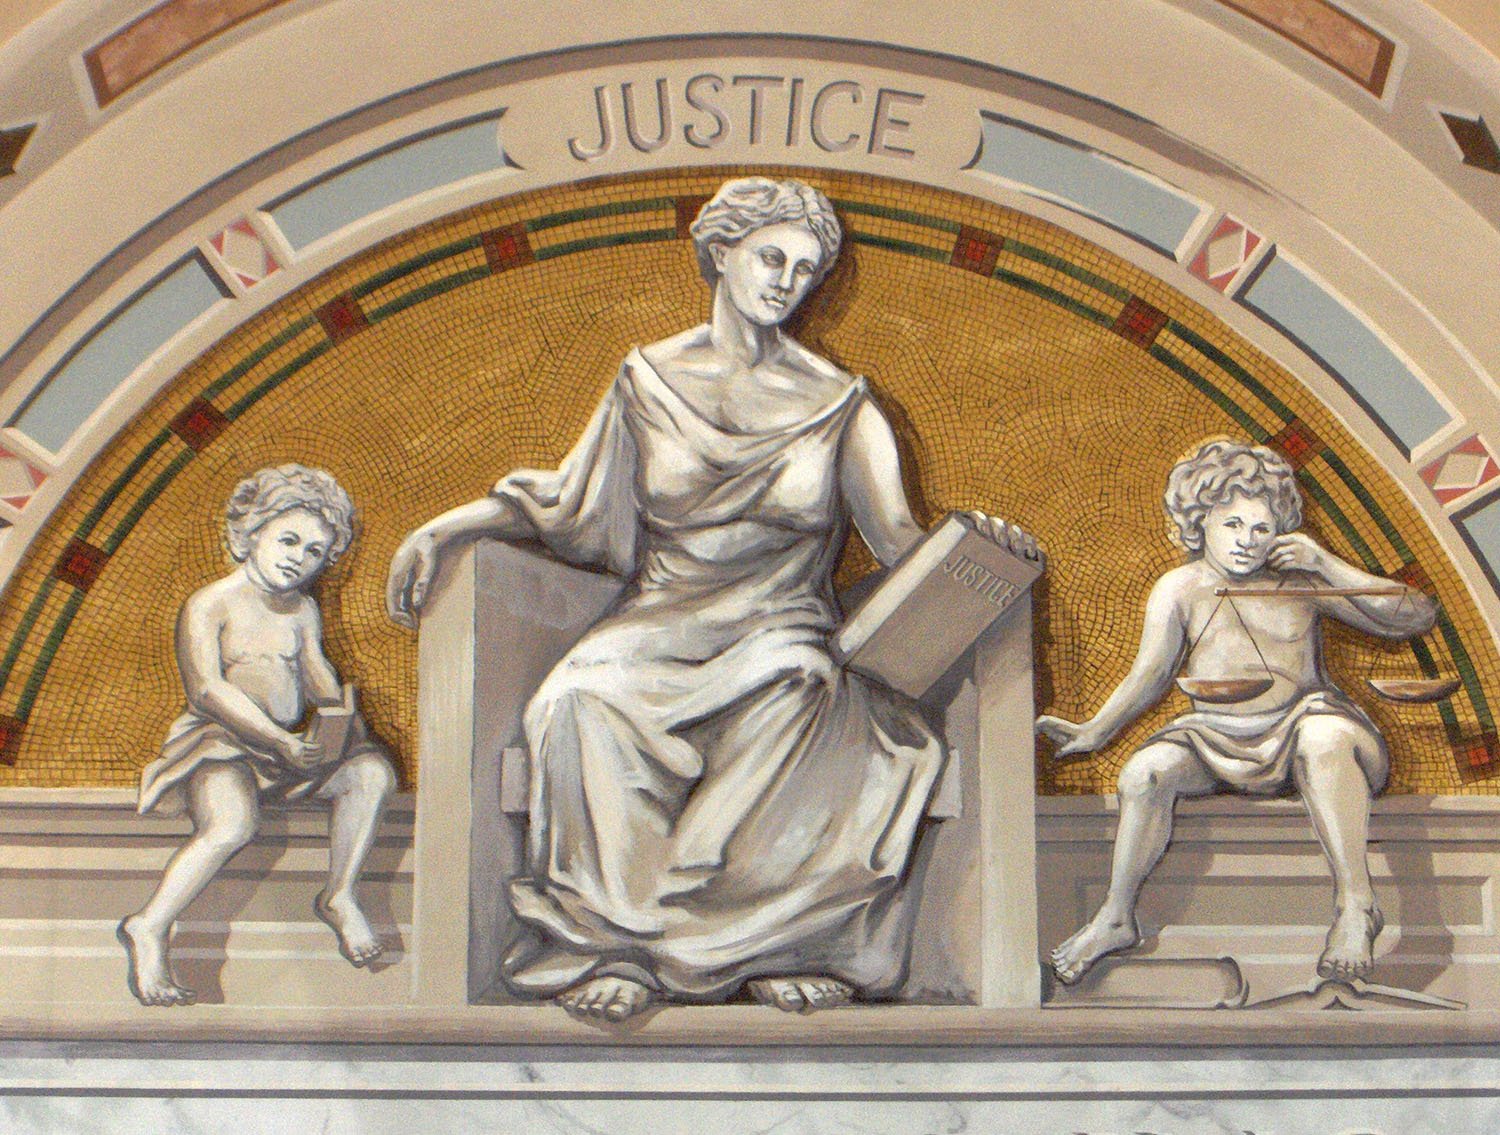    New York City Bar Association Mural  (detail, allegorical figure of Justice, executed entirely by Ray Guzman),  1983. Keim paints on plaster. Designed by Richard Haas. 